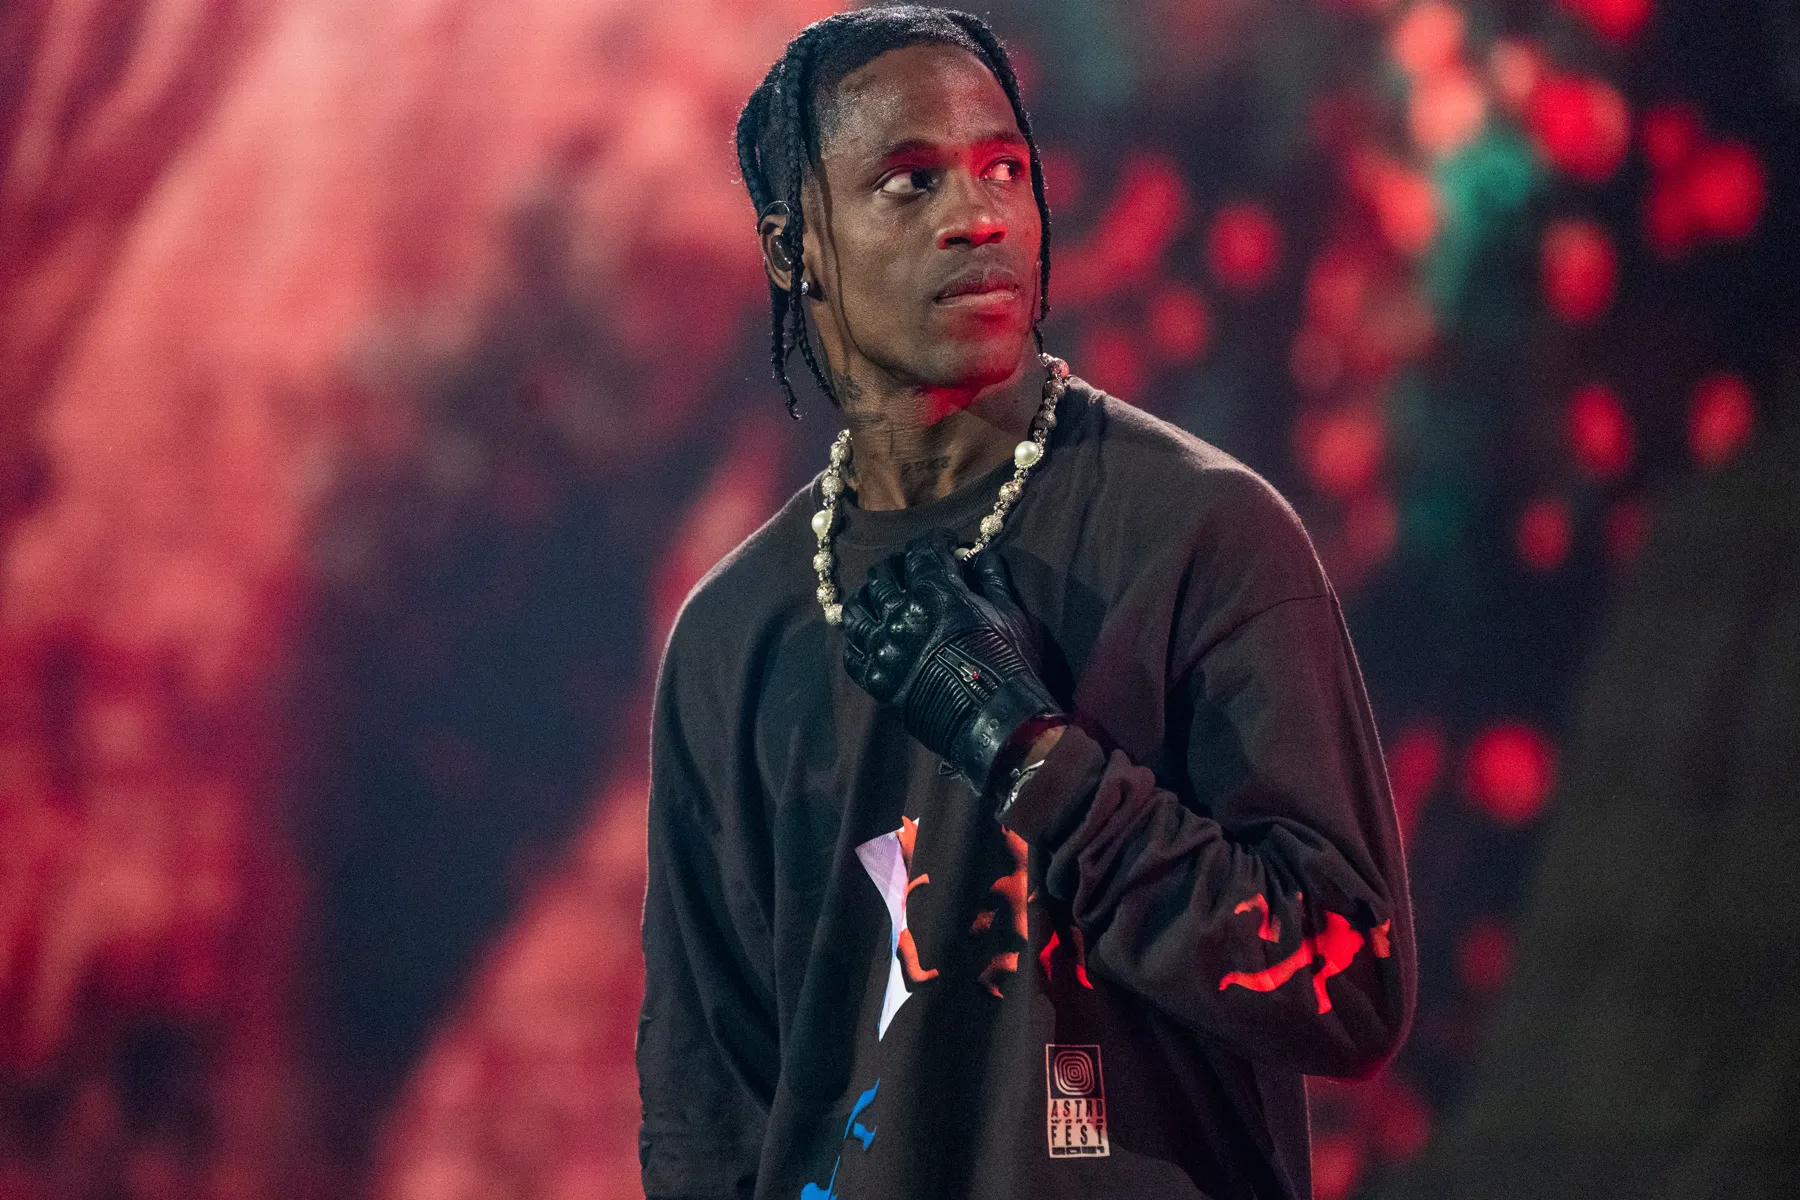 Travis Scott And Live Nation Have Reportedly Settled 9 Out Of 10 Wrongful Death Lawsuits In Relation To The 2021 Astroworld Tragedy